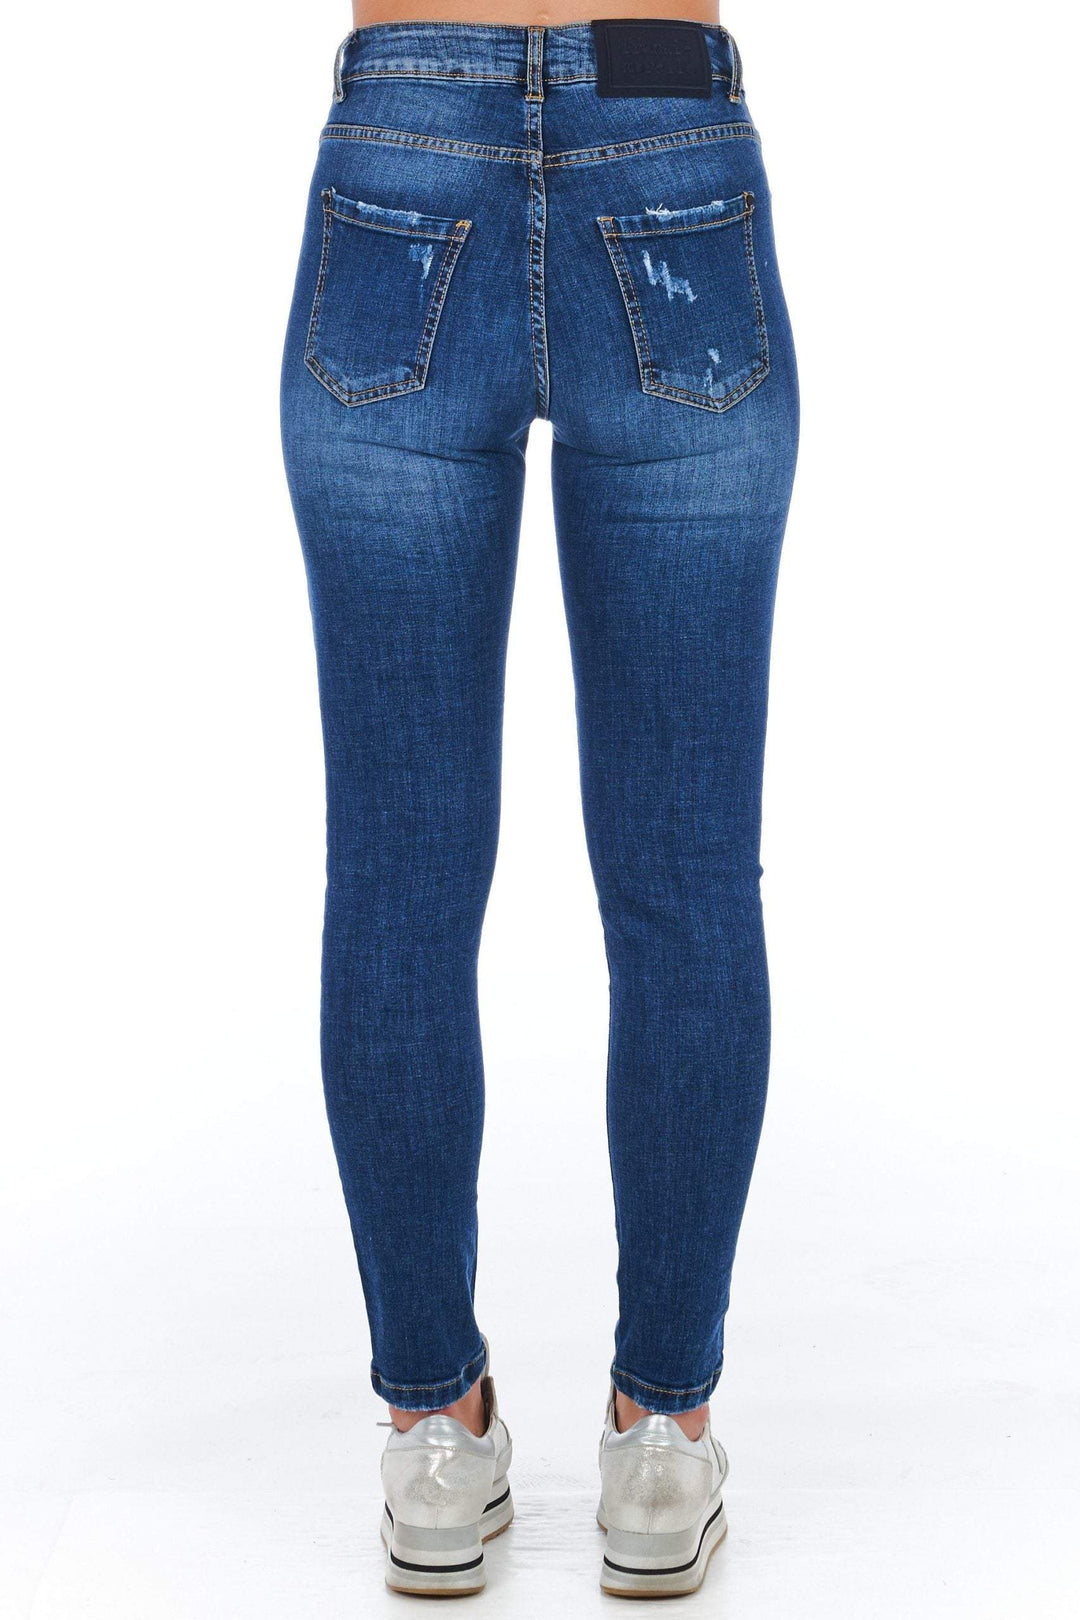 Frankie Morello Blue Jeans & Pant Blue, feed-1, Frankie Morello, Jeans & Pants - Women - Clothing, W27 | IT41 at SEYMAYKA